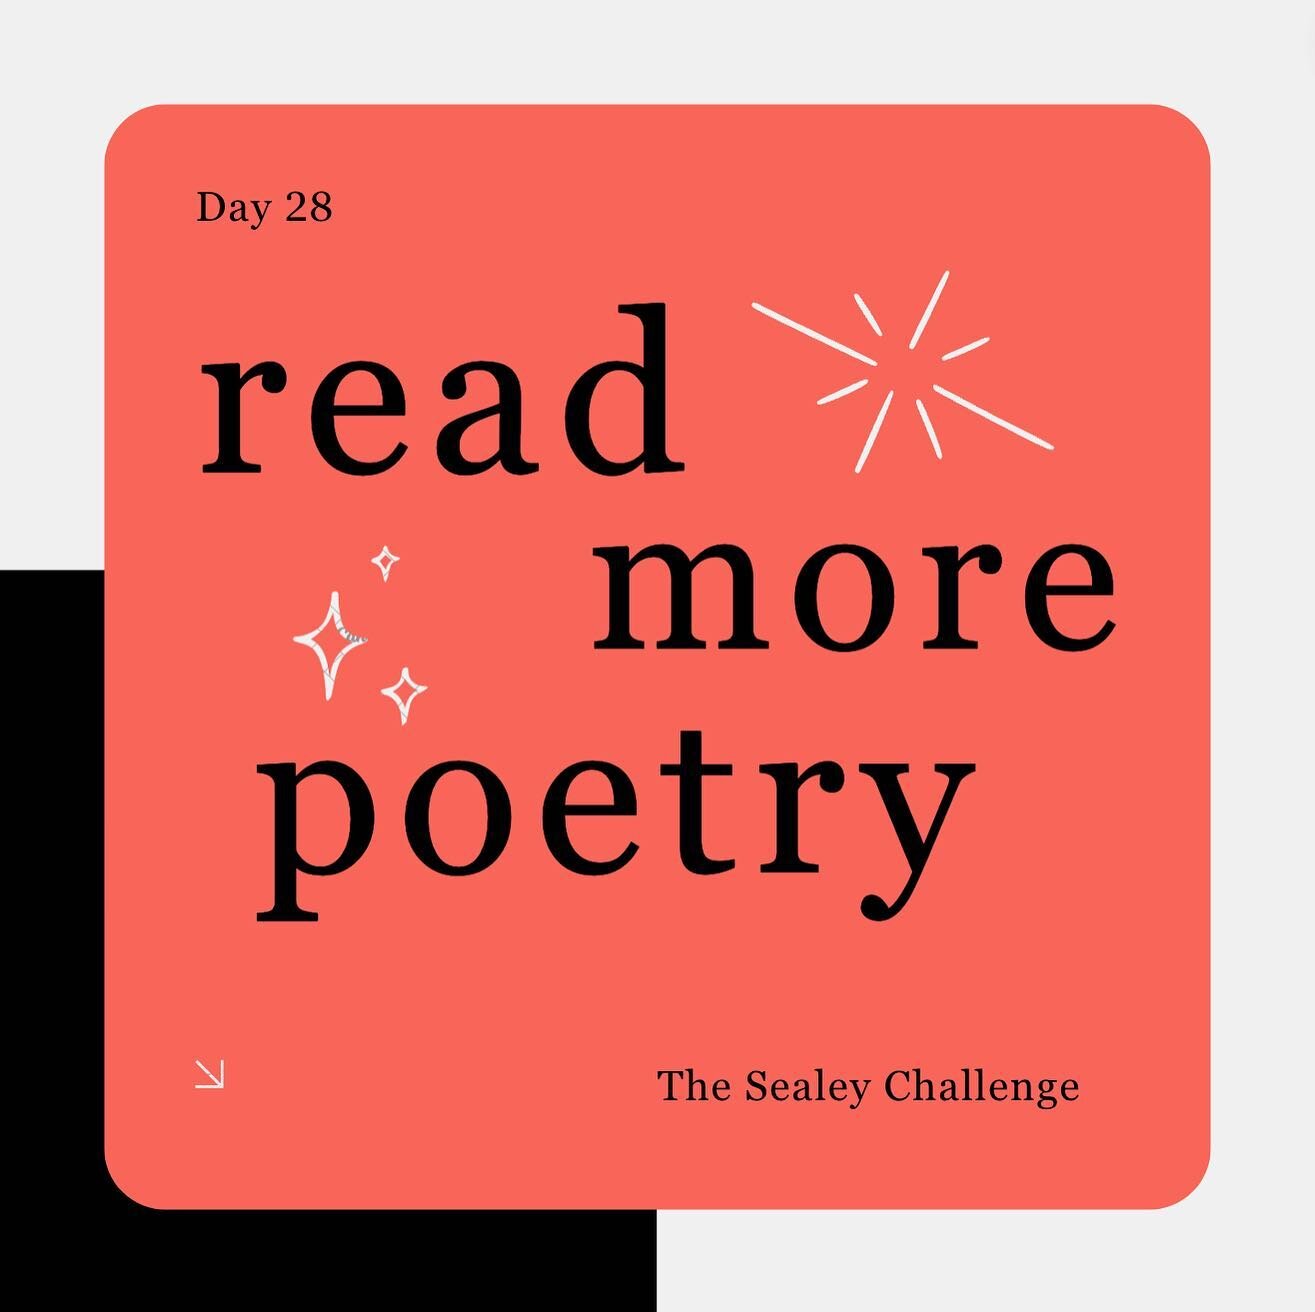 Day 28 of #TheSealeyChallenge 📚

Today's #MondayMood is celebrating the real goal of the Challenge: #readmorepoetry! 

Just 2 more days left! Let's finish strong!

alt text: red, black, and white graphic reading &quot;read more poetry&quot;